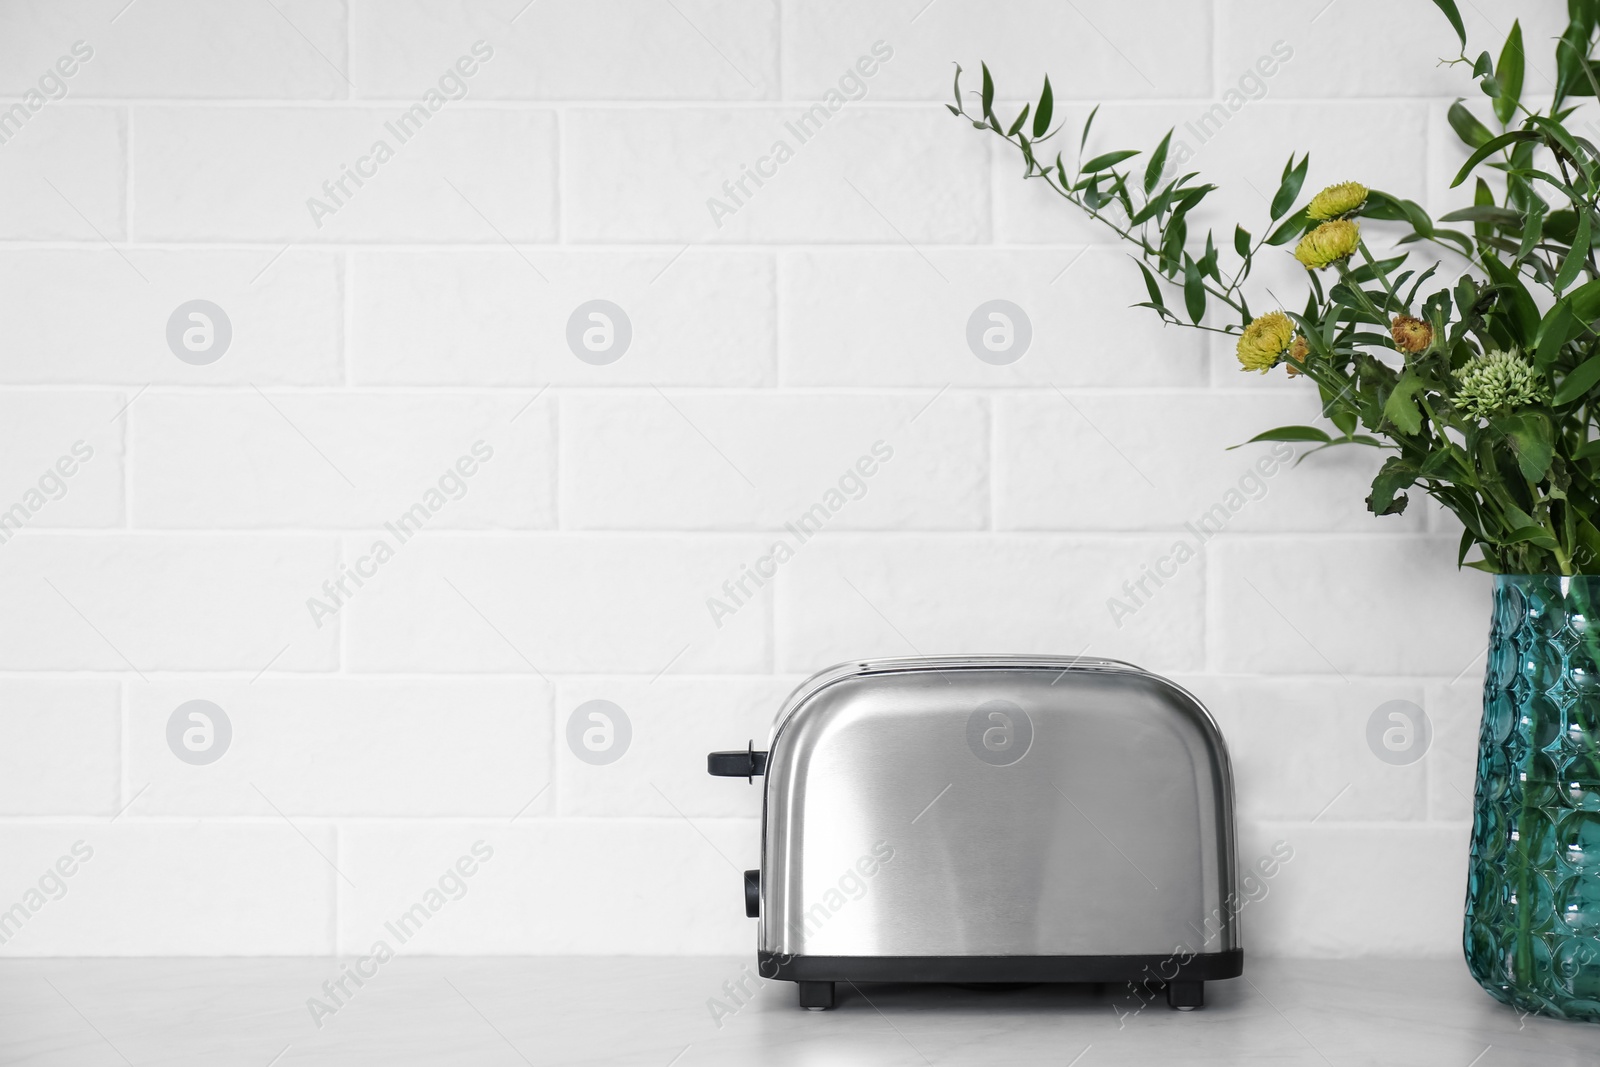 Photo of Modern stainless steel toaster on countertop in kitchen. Space for text